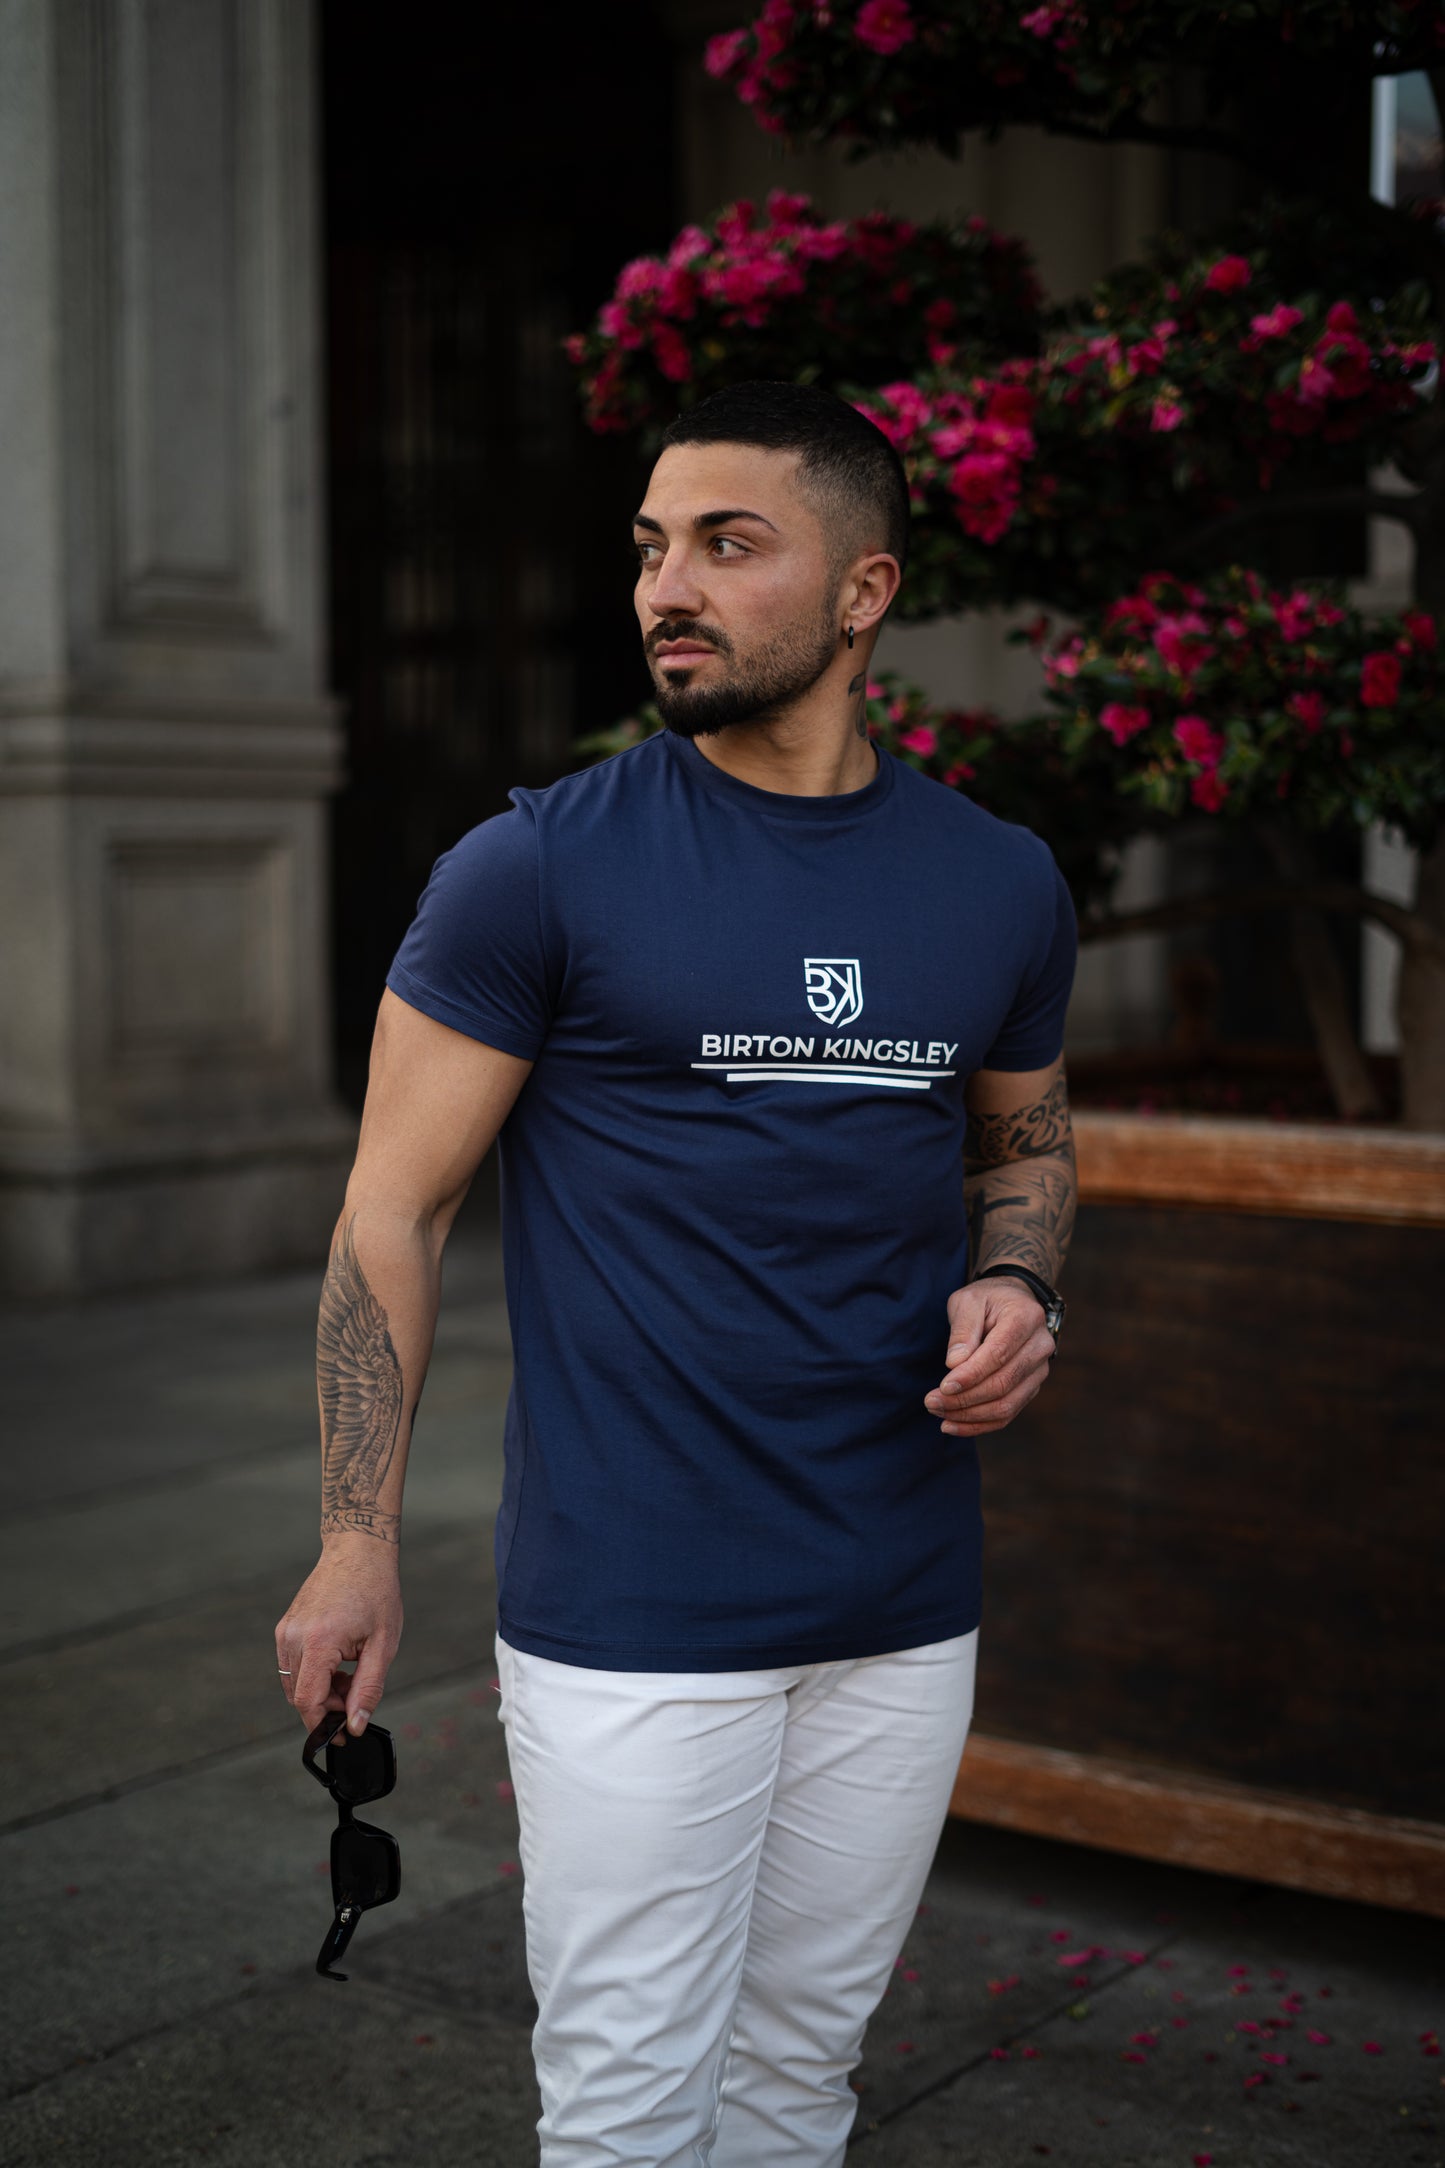 Exeter - Premium T-shirt Royal Blue made from 100% Supima cotton